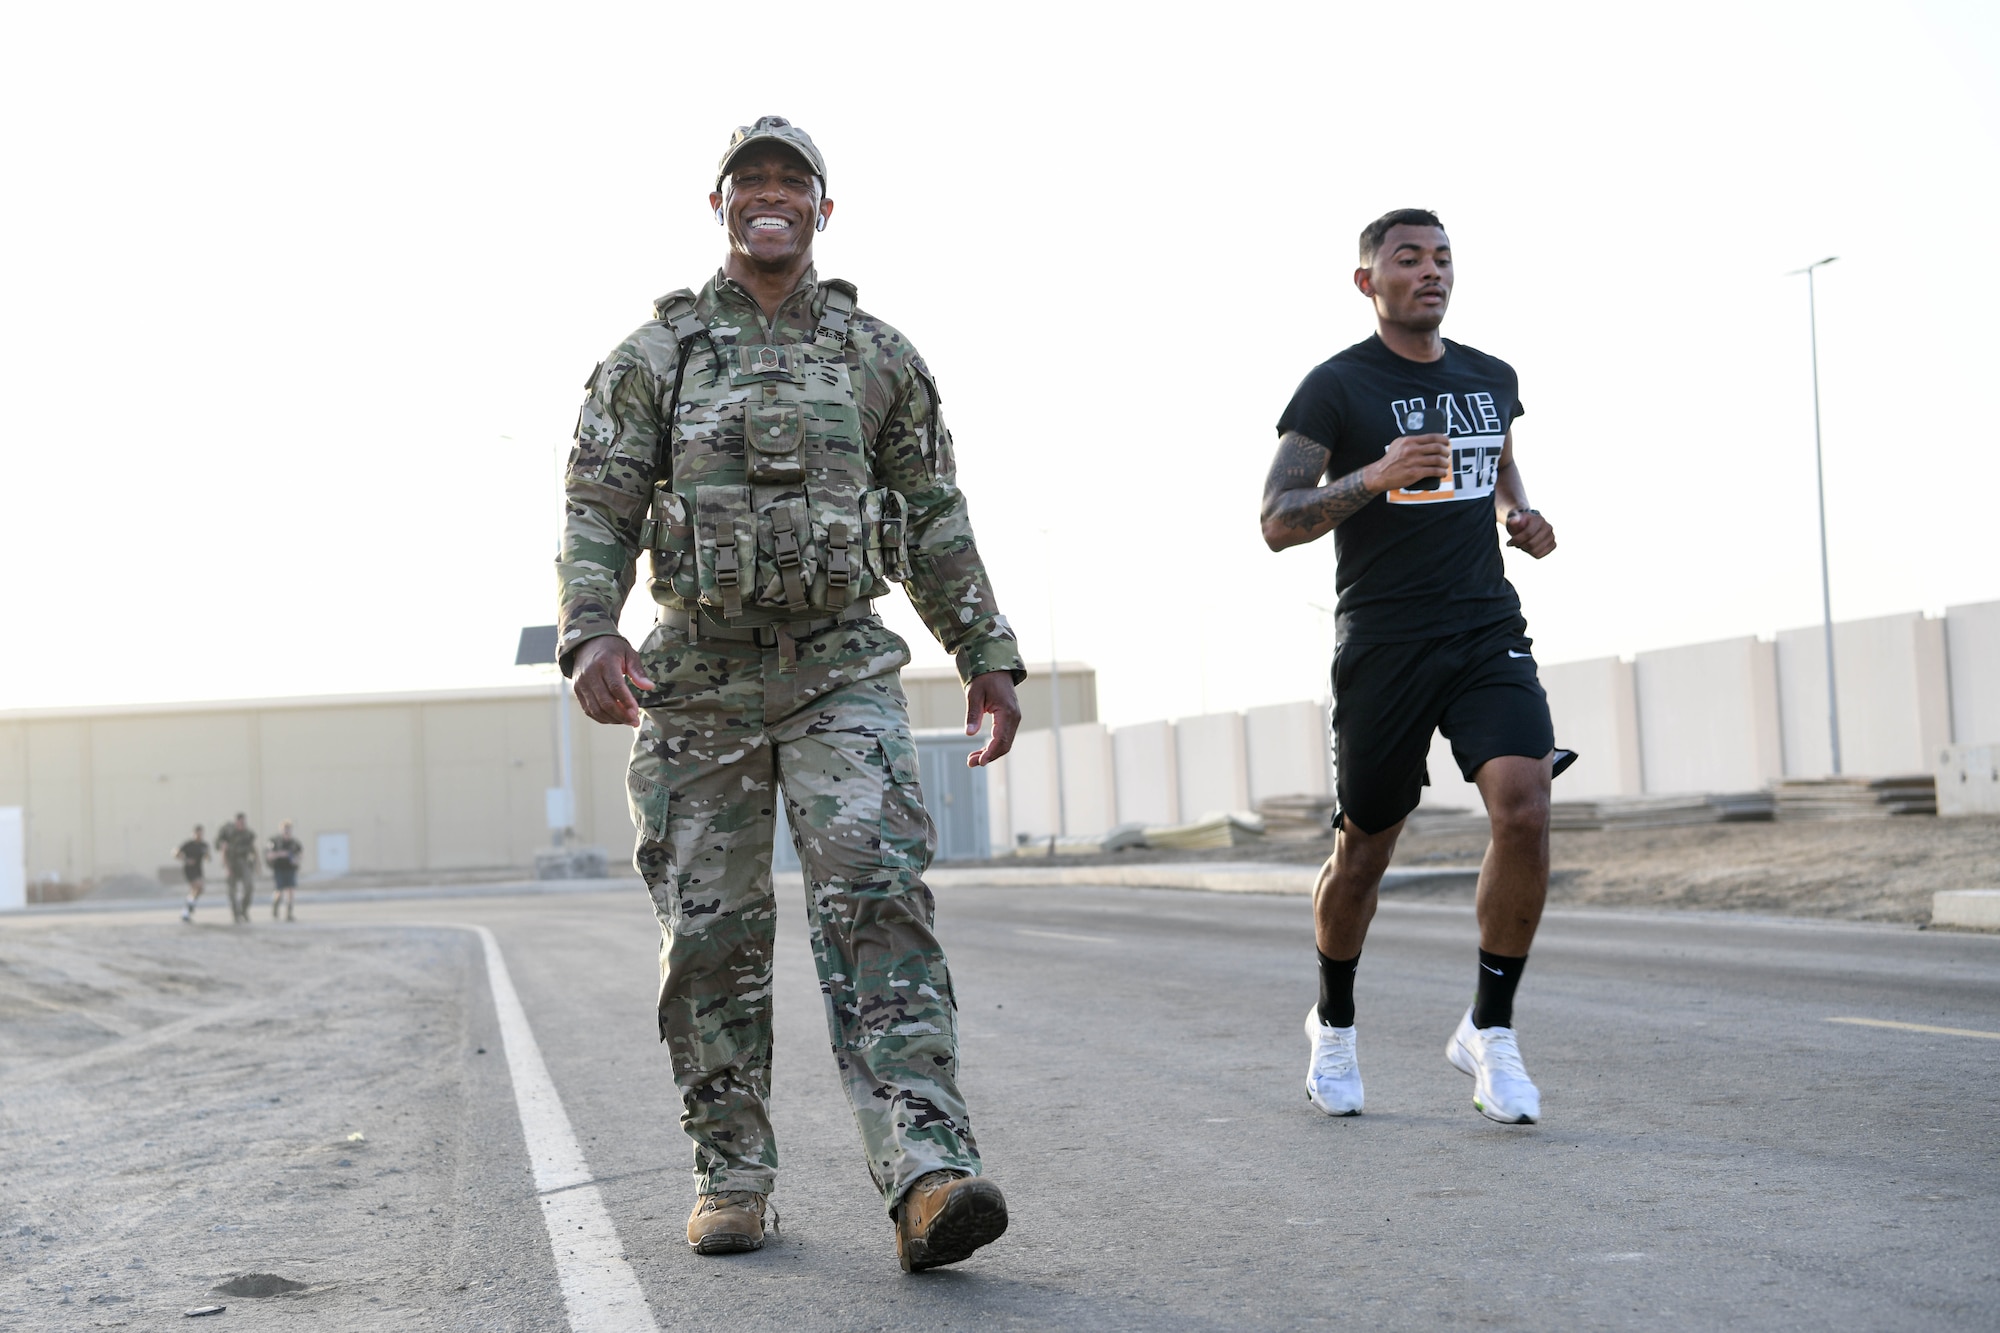 Airmen from the 380th Air Expeditionary Wing participate in a memorial ruck and run event during Police Week, May 20, 2022 at Al Dhafra Air Base, United Arab Emirates. In 1962, President John F. Kennedy signed a proclamation which designated May 15th as National Peace Officers Memorial Day, and the week in which it falls as National Police Week. Since the first service memorial gathering in Senate Park, Washington D.C., U.S. agencies across the nation and abroad have held events to honor fallen officers and acknowledge their sacrifices.